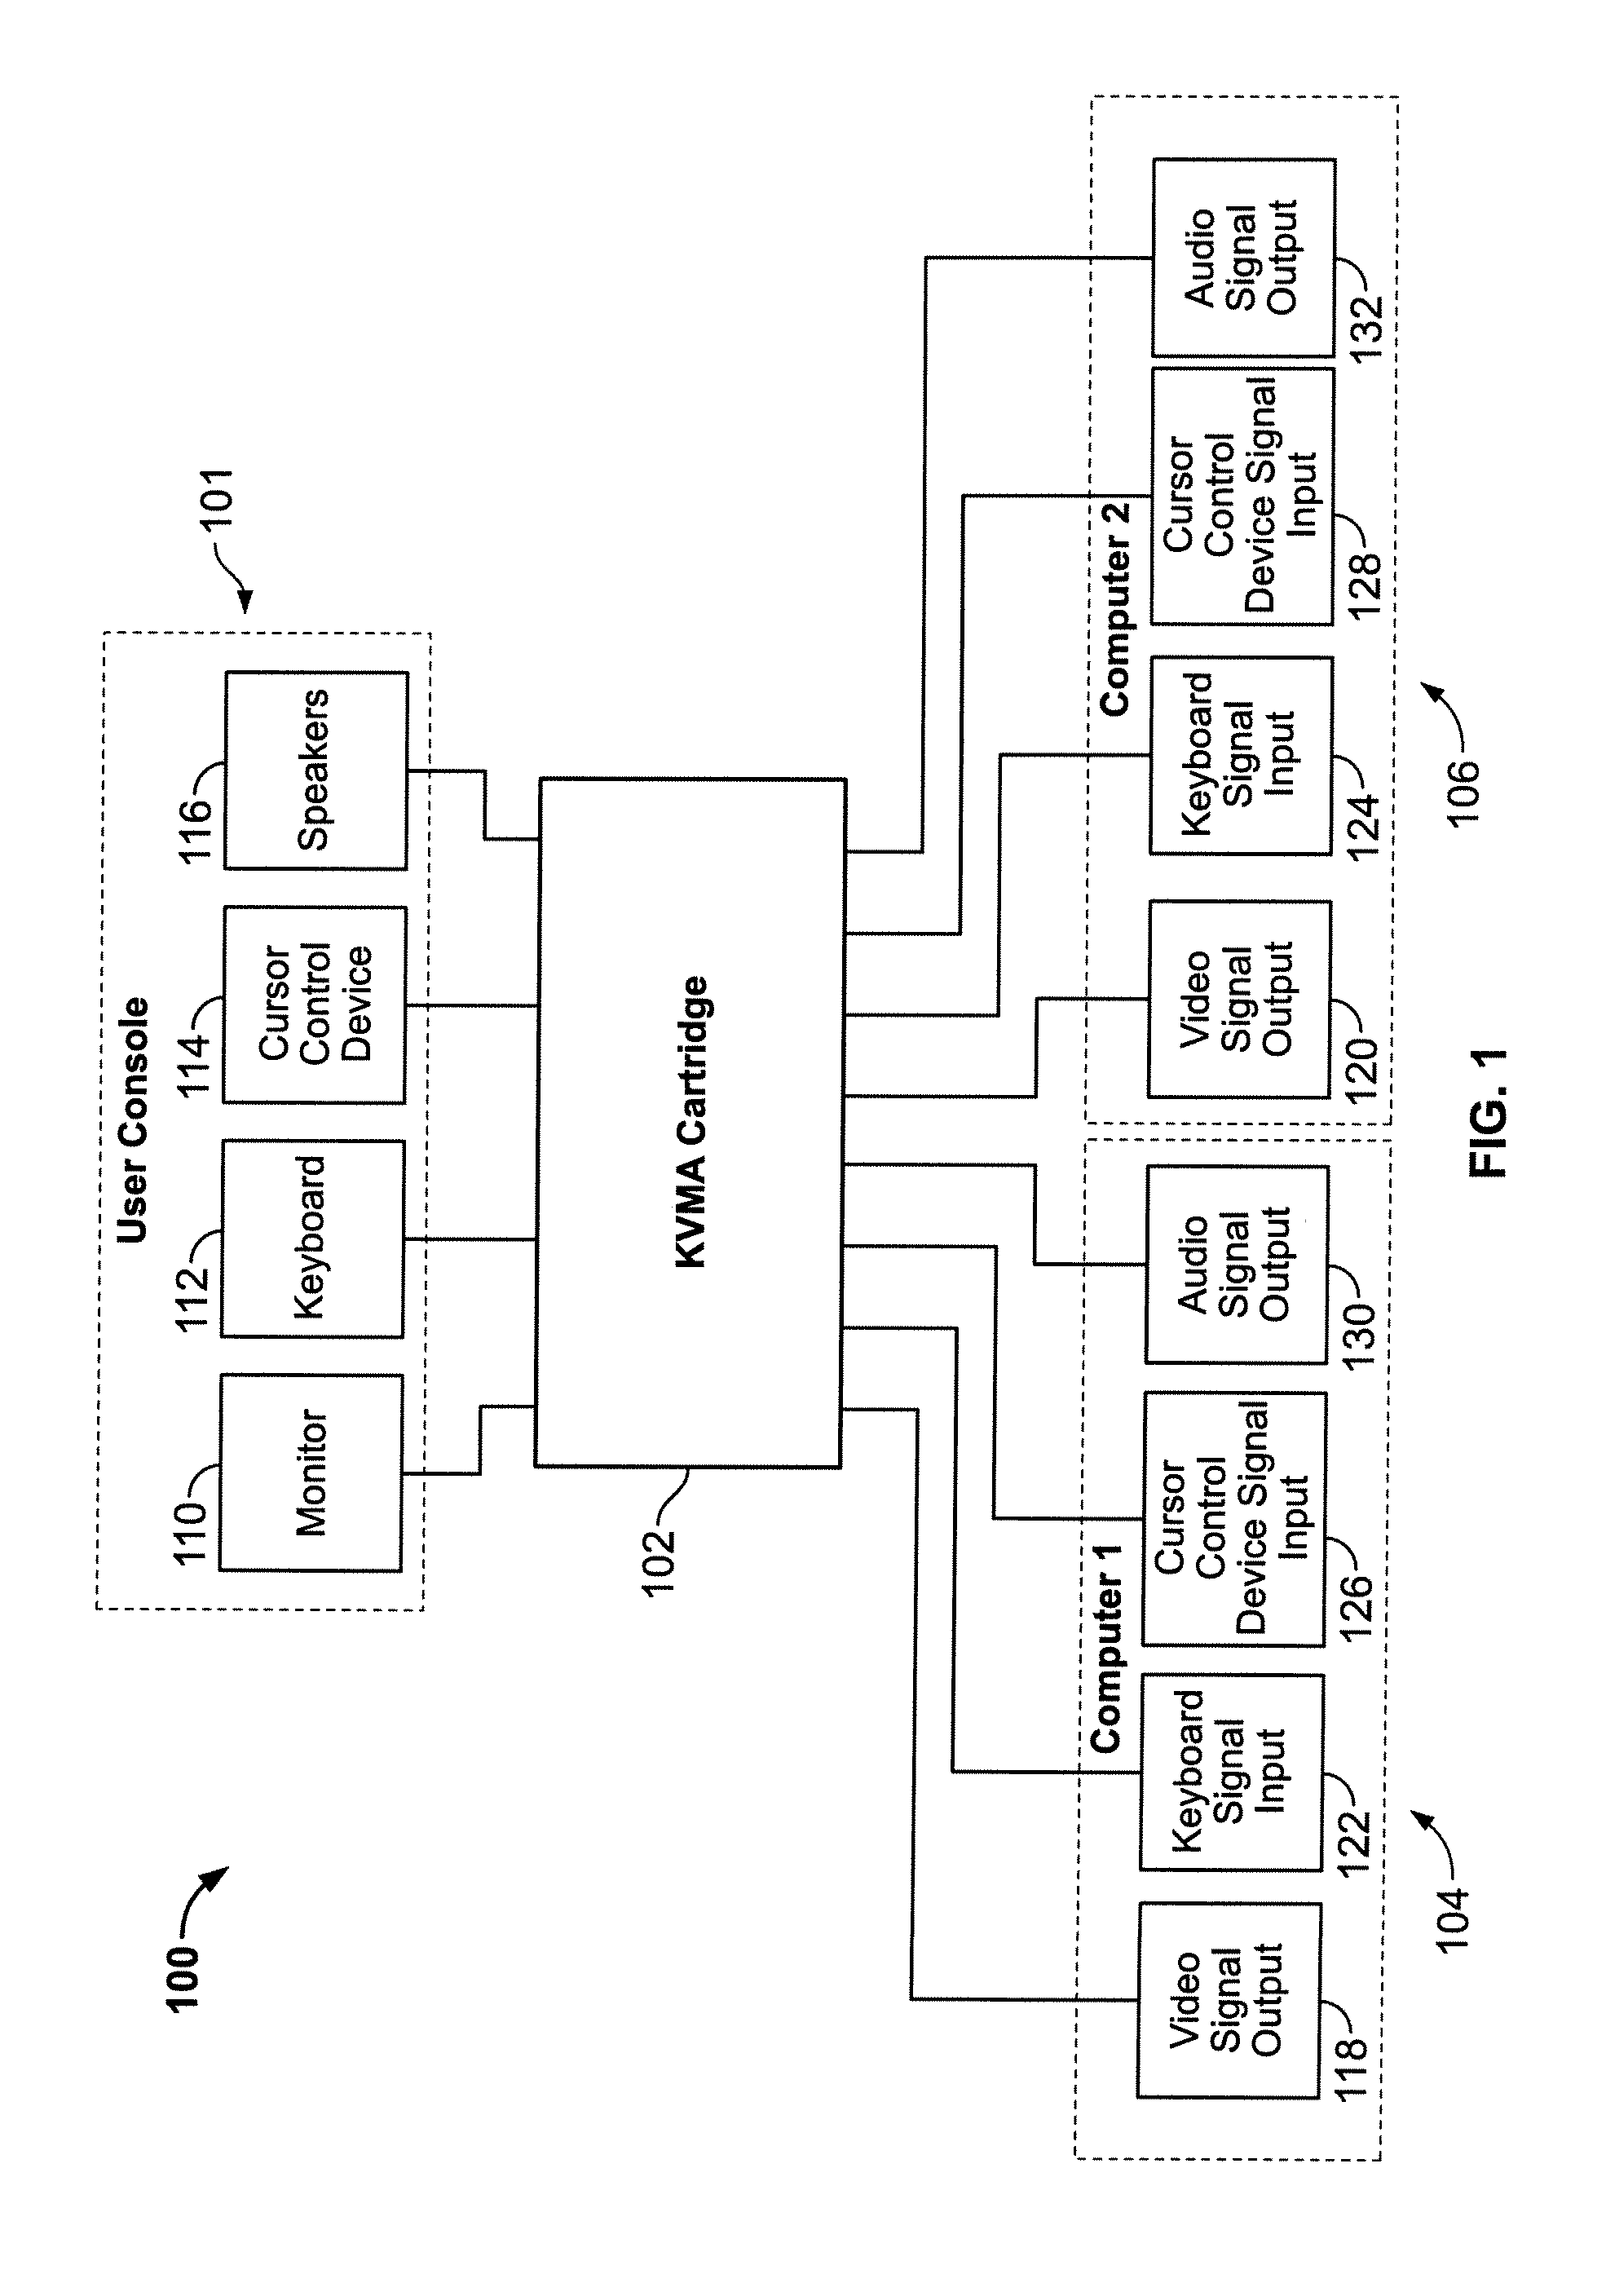 Apparatus for managing multiple computers with a cartridge connector